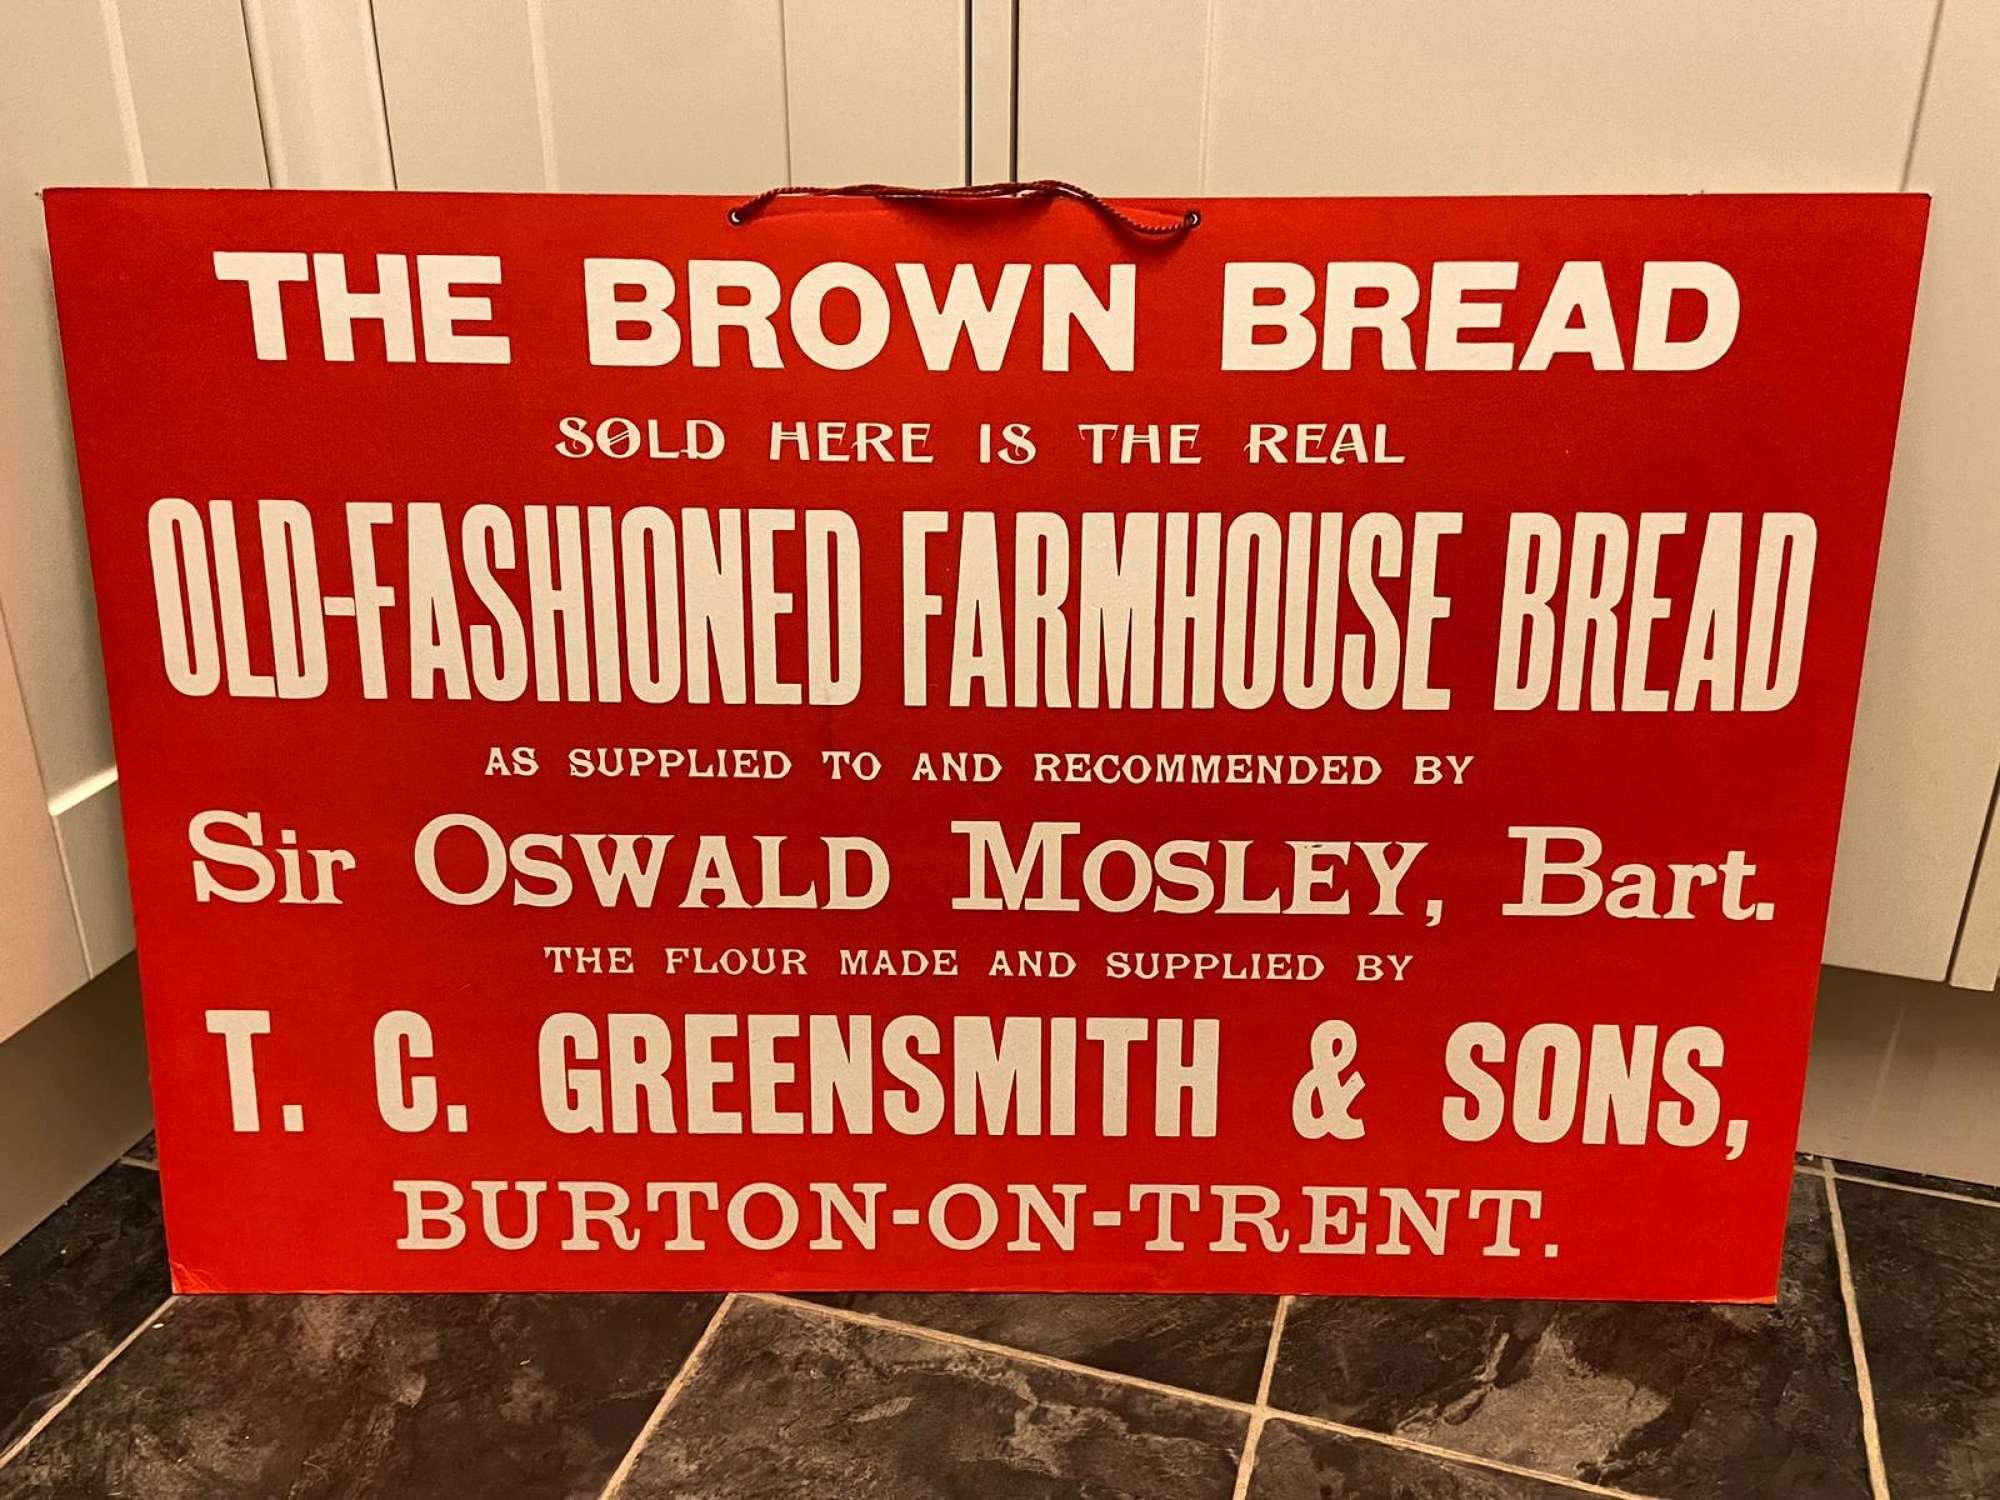 WW2 British-Union-Of-Fascists Oswald Mosley Bread Endorsement Poster